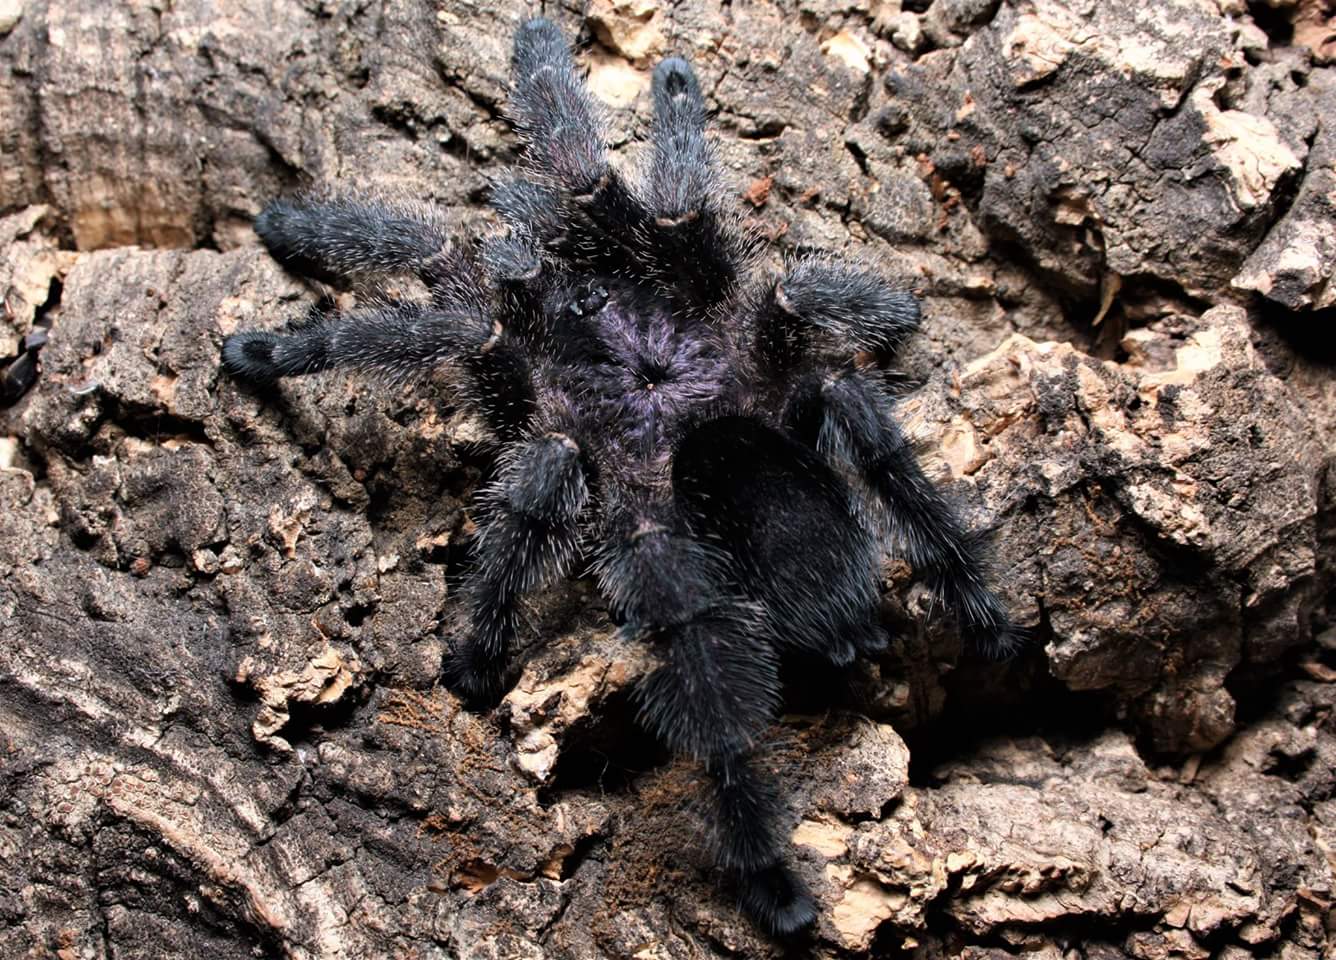 Avicularia sp. "Colombia"